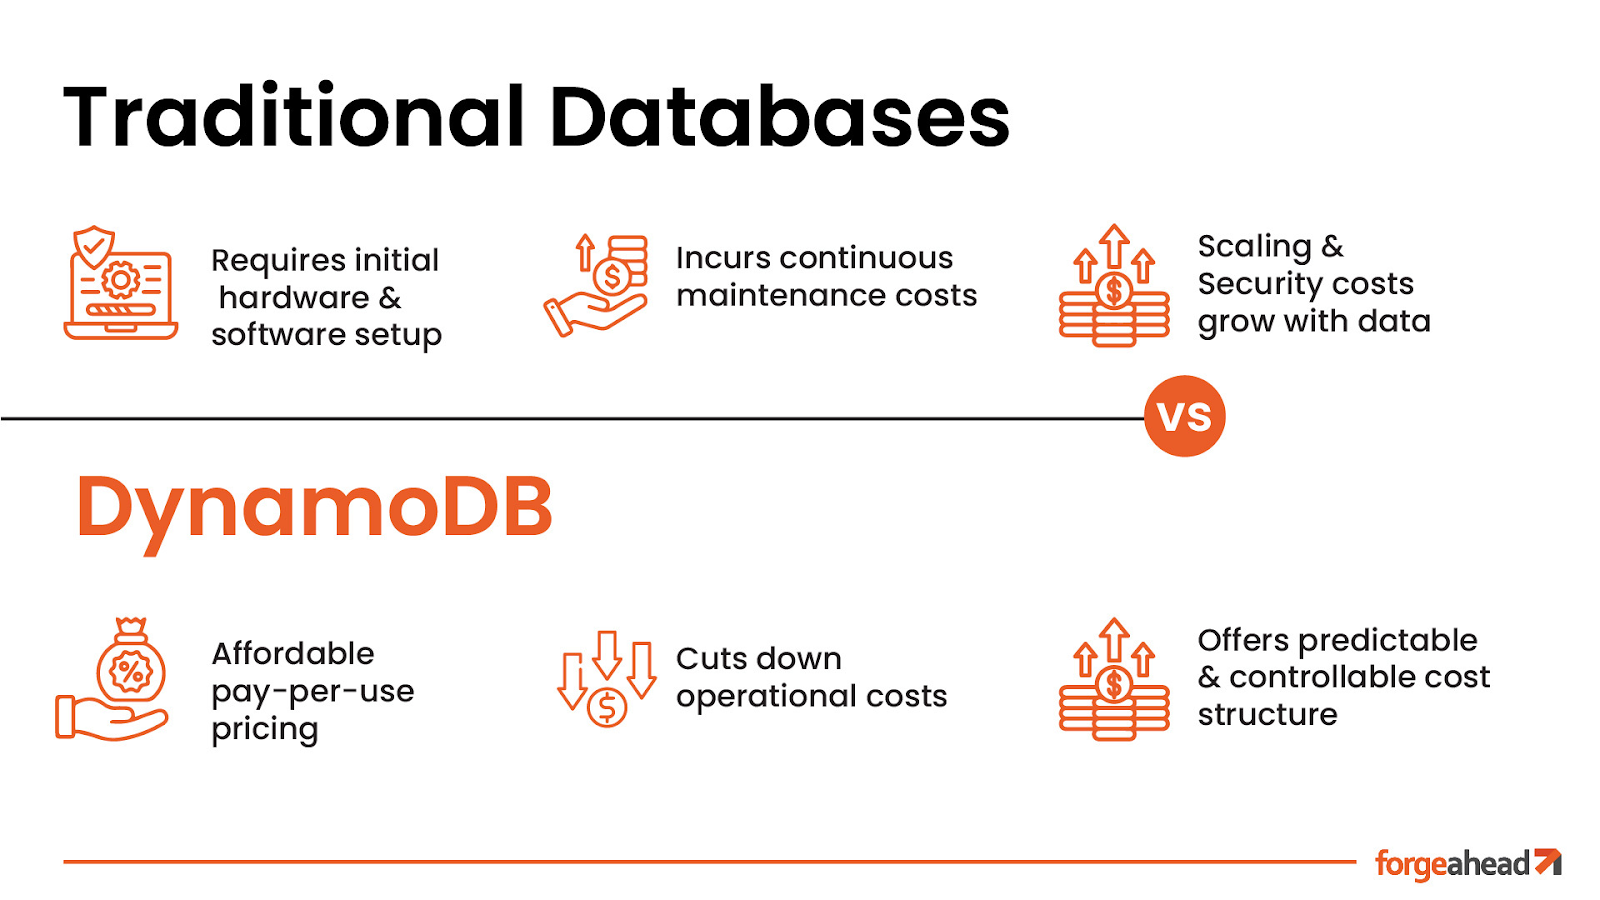 Cost and Performance Of DynamoDB 